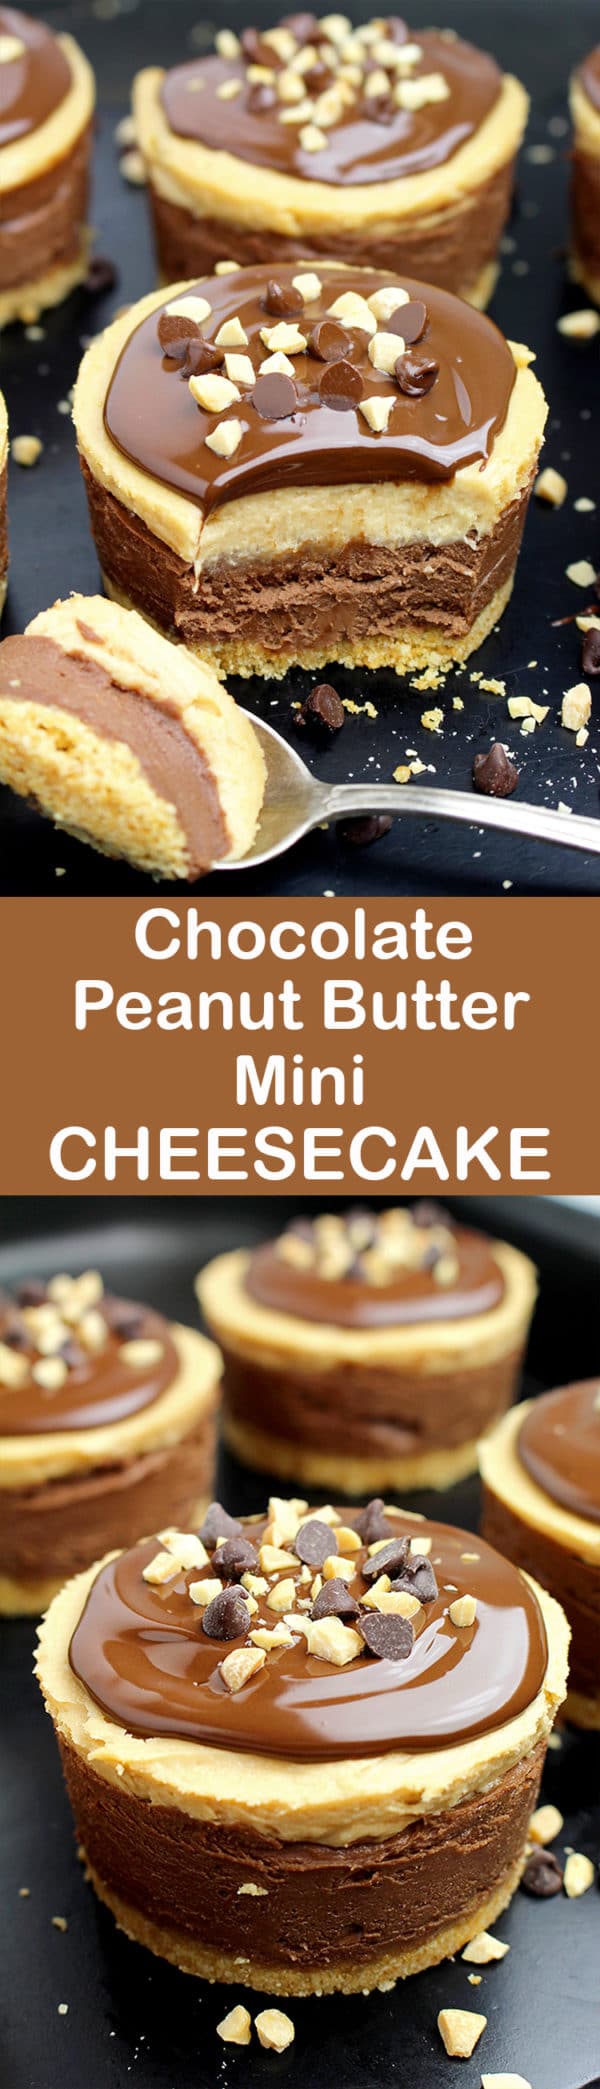 Chocolate and peanut butter… Do you like this combination? If your answer is yes, we have an awesome dessert for you – No Bake Chocolate Peanut Butter Mini Cheesecake